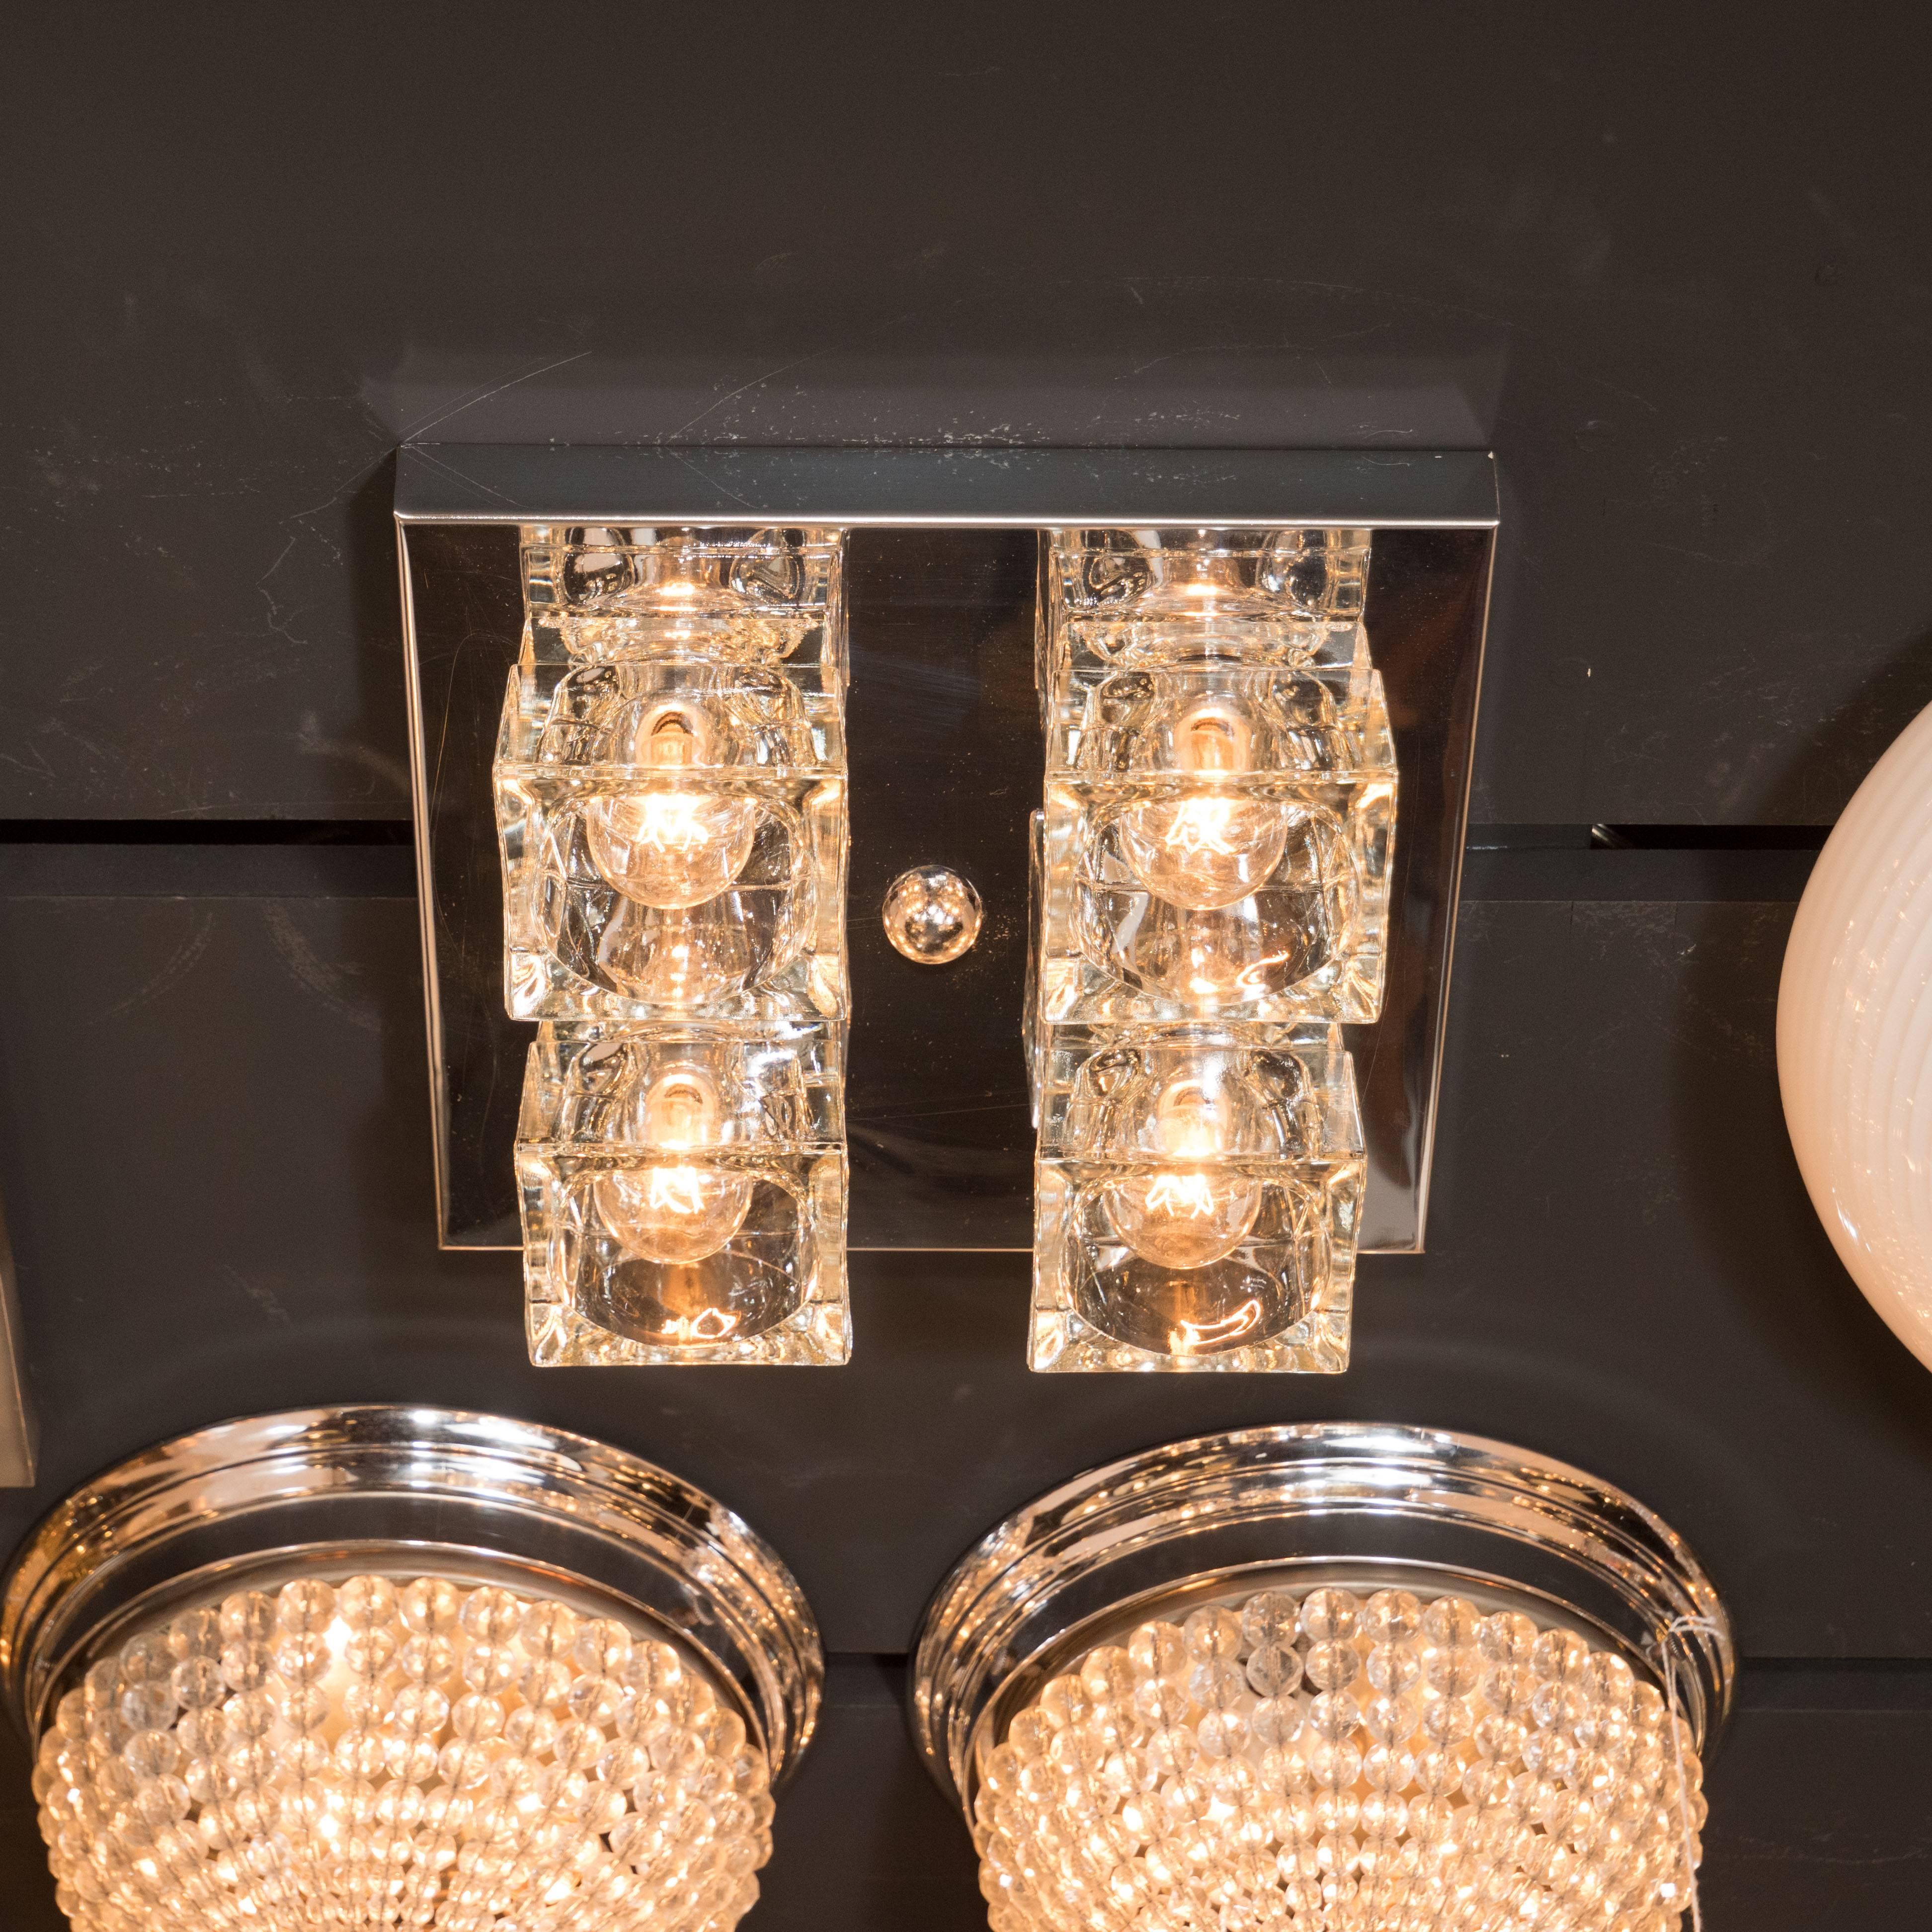 This brilliant Mid-Century Modern flush mount chandelier by Sciolari features four thick clear glass cubes with inset bulbs fixed to a close fitting chrome backplate. The design has strong geometric qualities with the cubes of the glass strongly